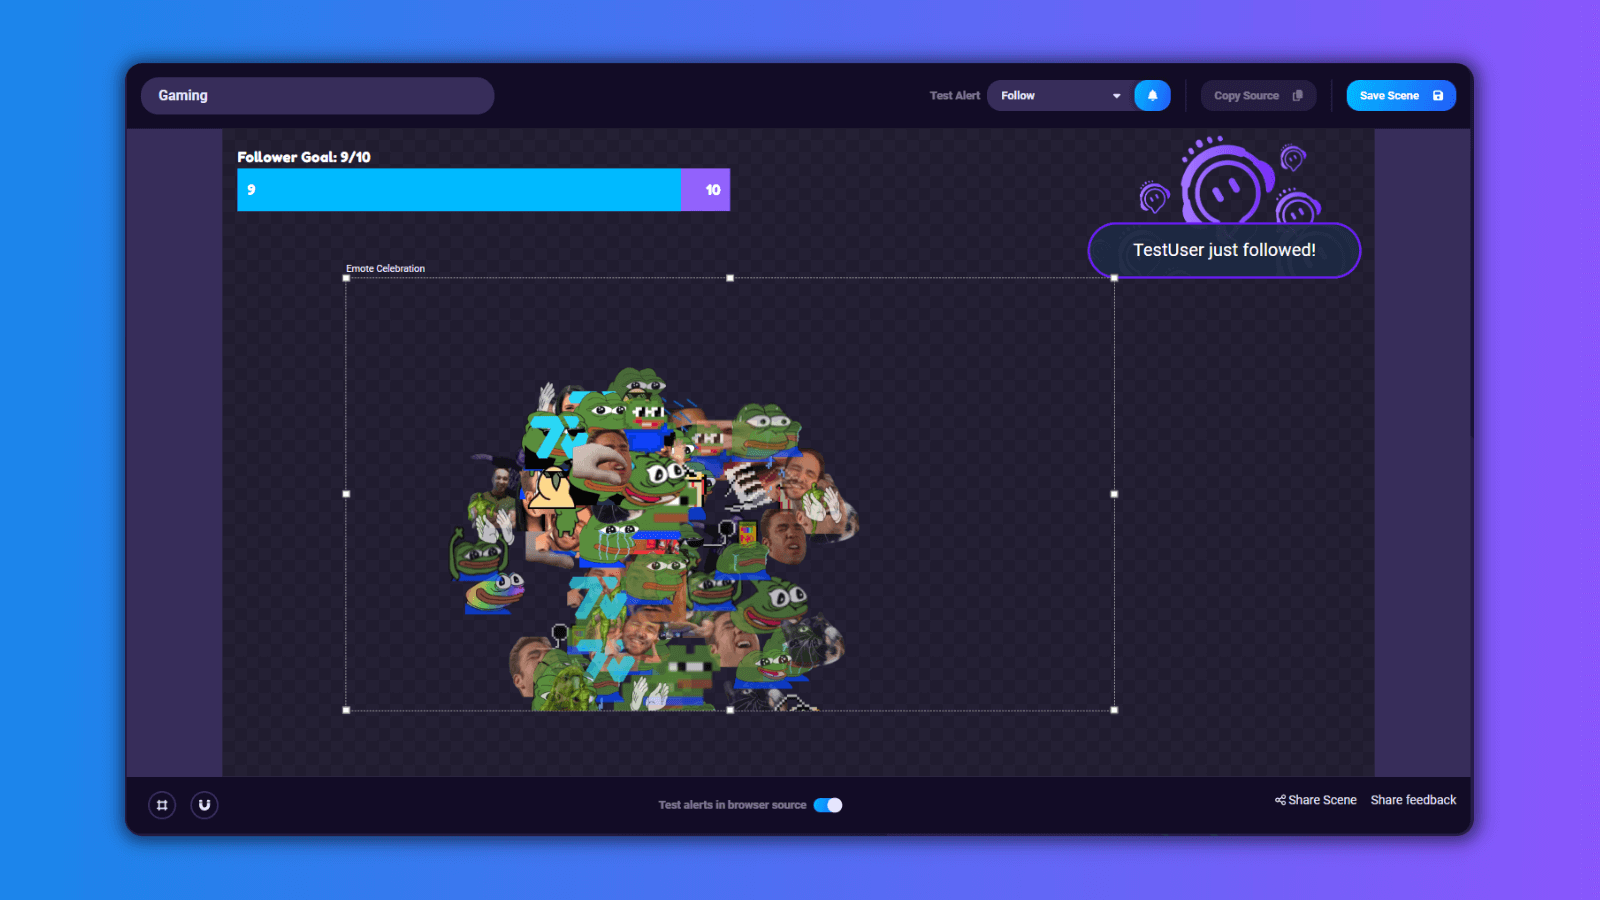 This image shows a preview of the Sound Alerts Scene Editor which includes a variety of free Twitch overlays.